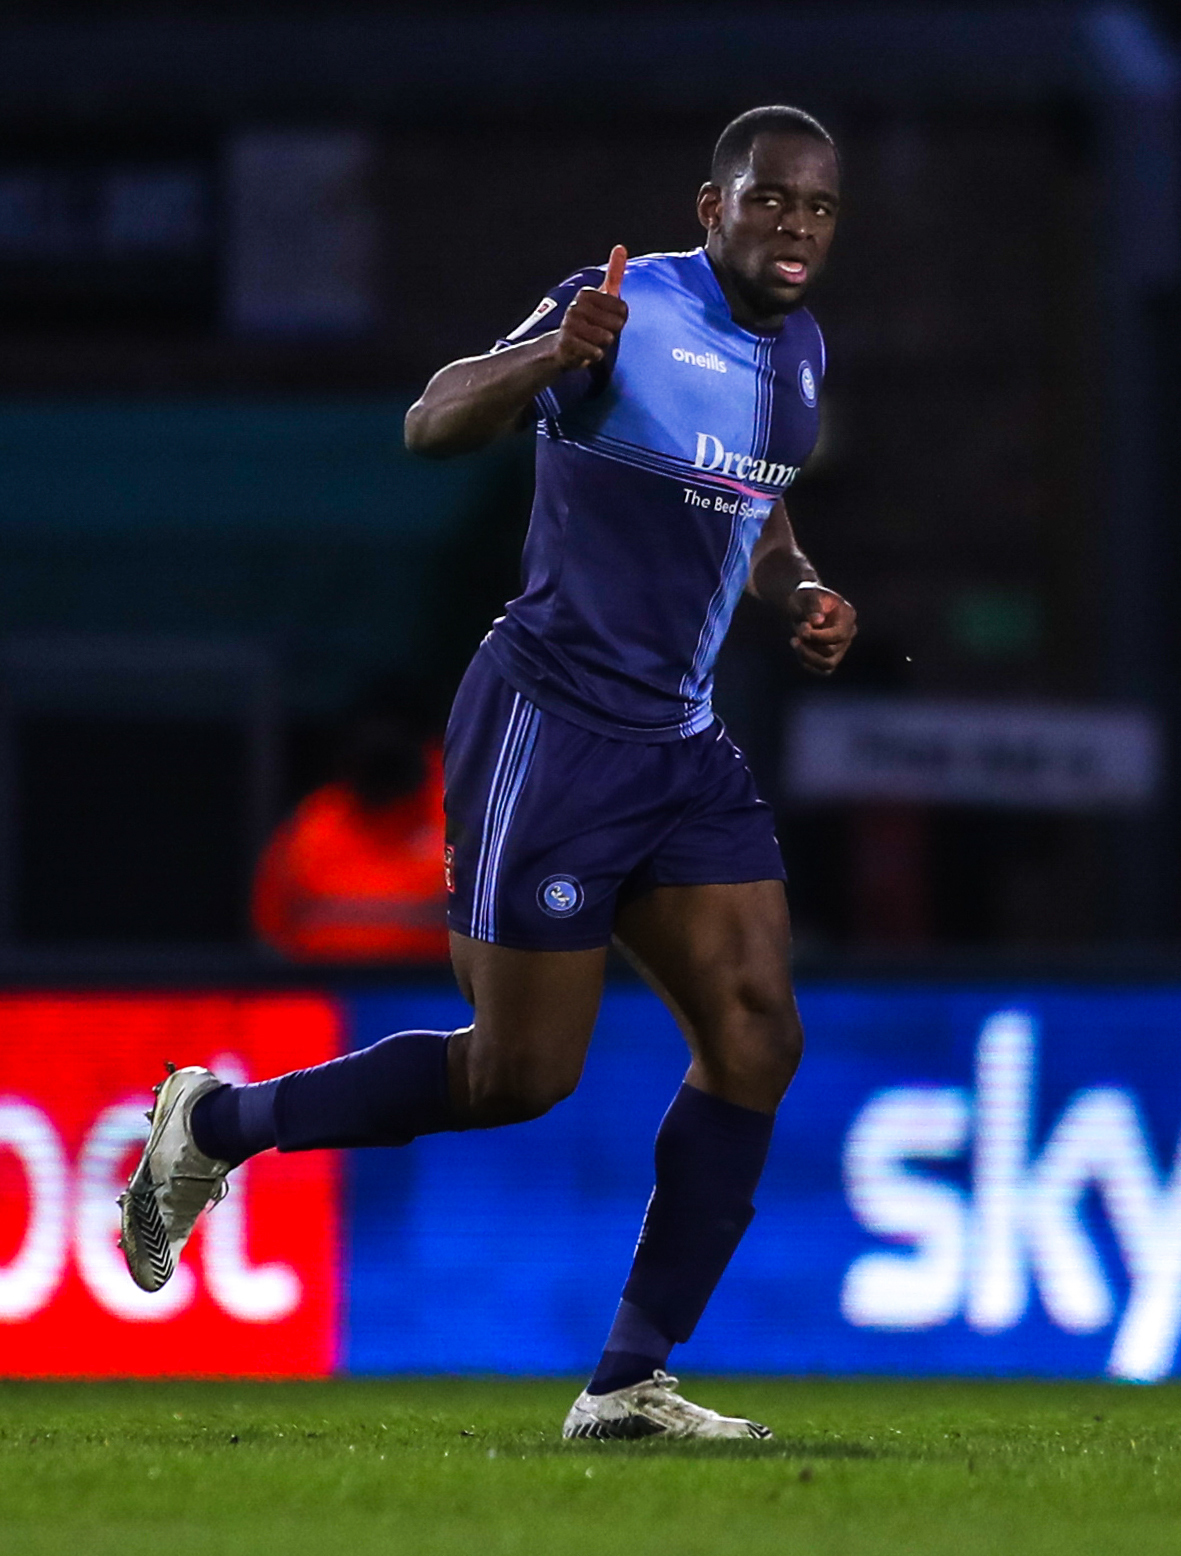 Uche Ikpeazu has been linked with a move away from the club this summer (PA)